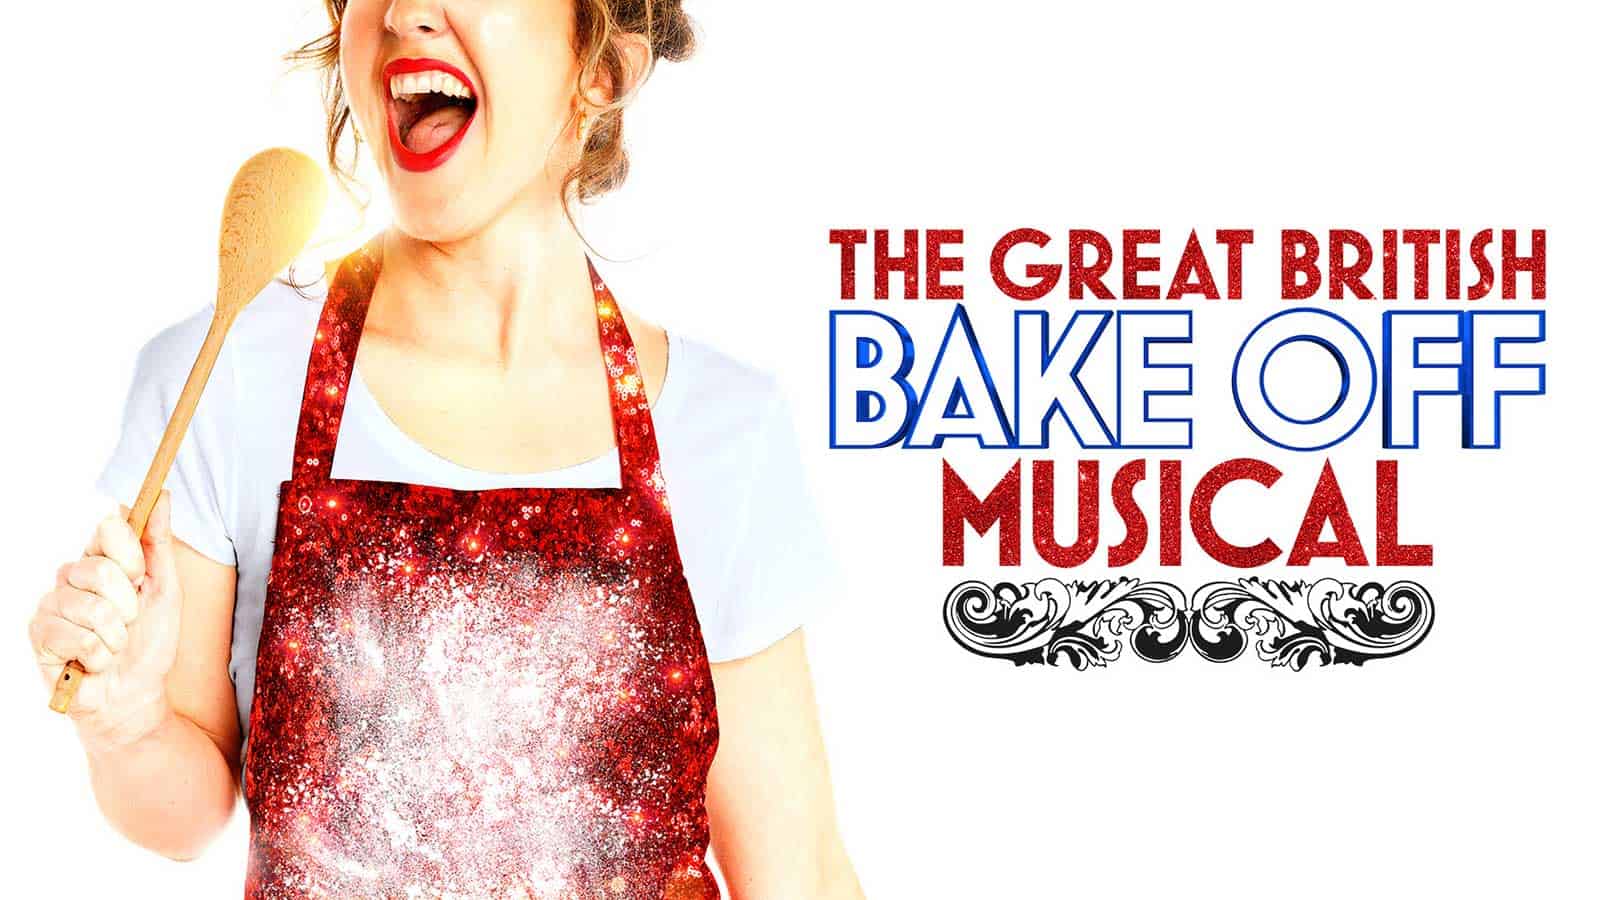 the-great-british-bake-off-musical-large